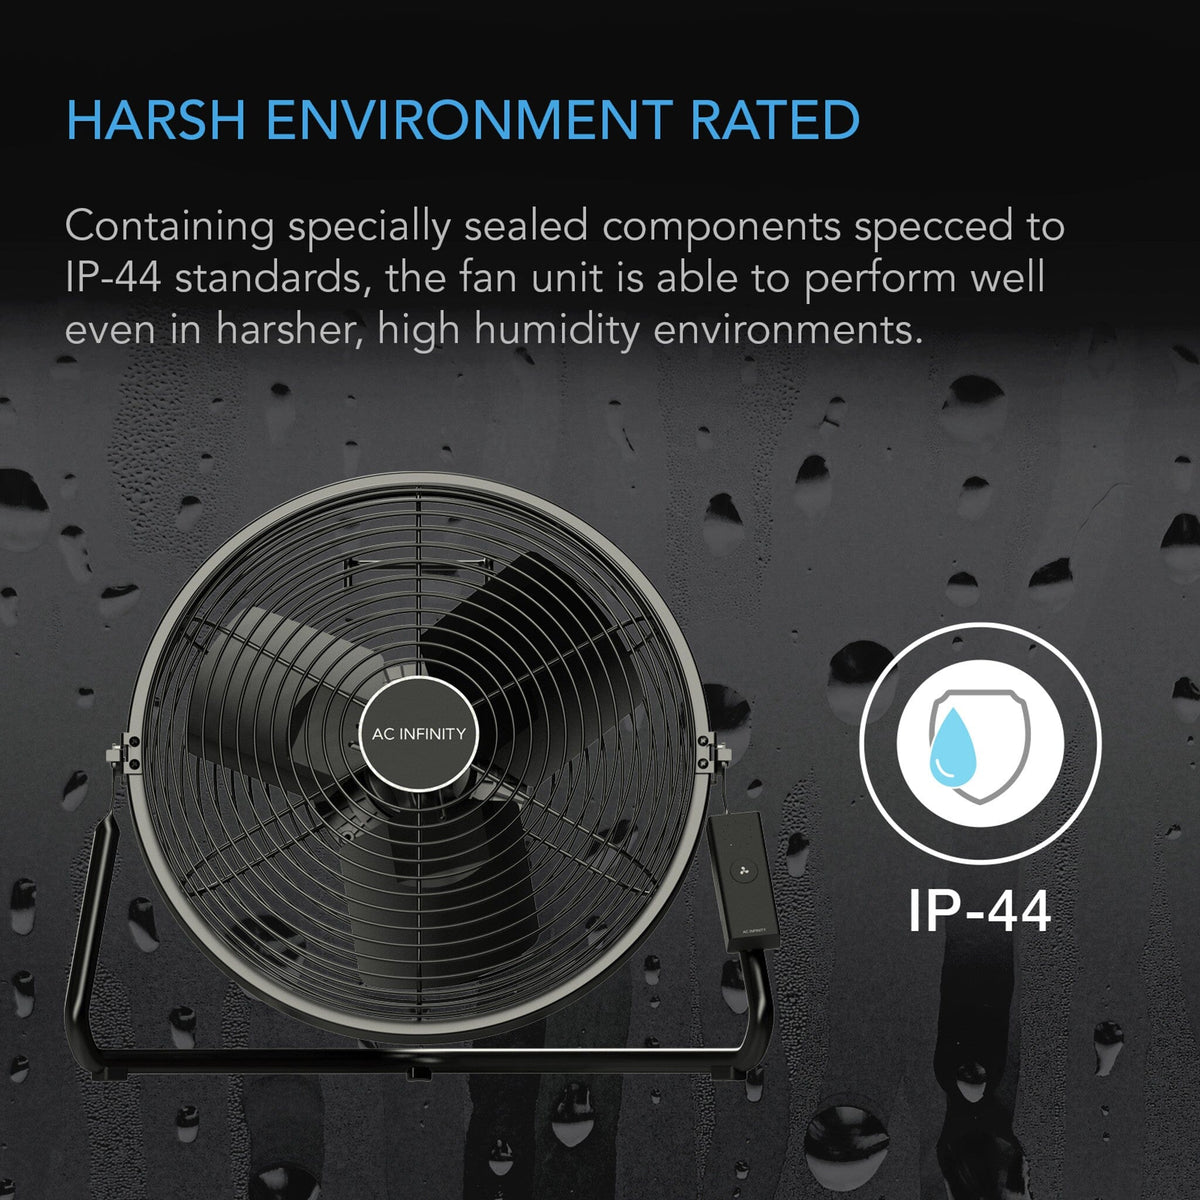 AC Infinity fan IP-44 rated for harsh environment